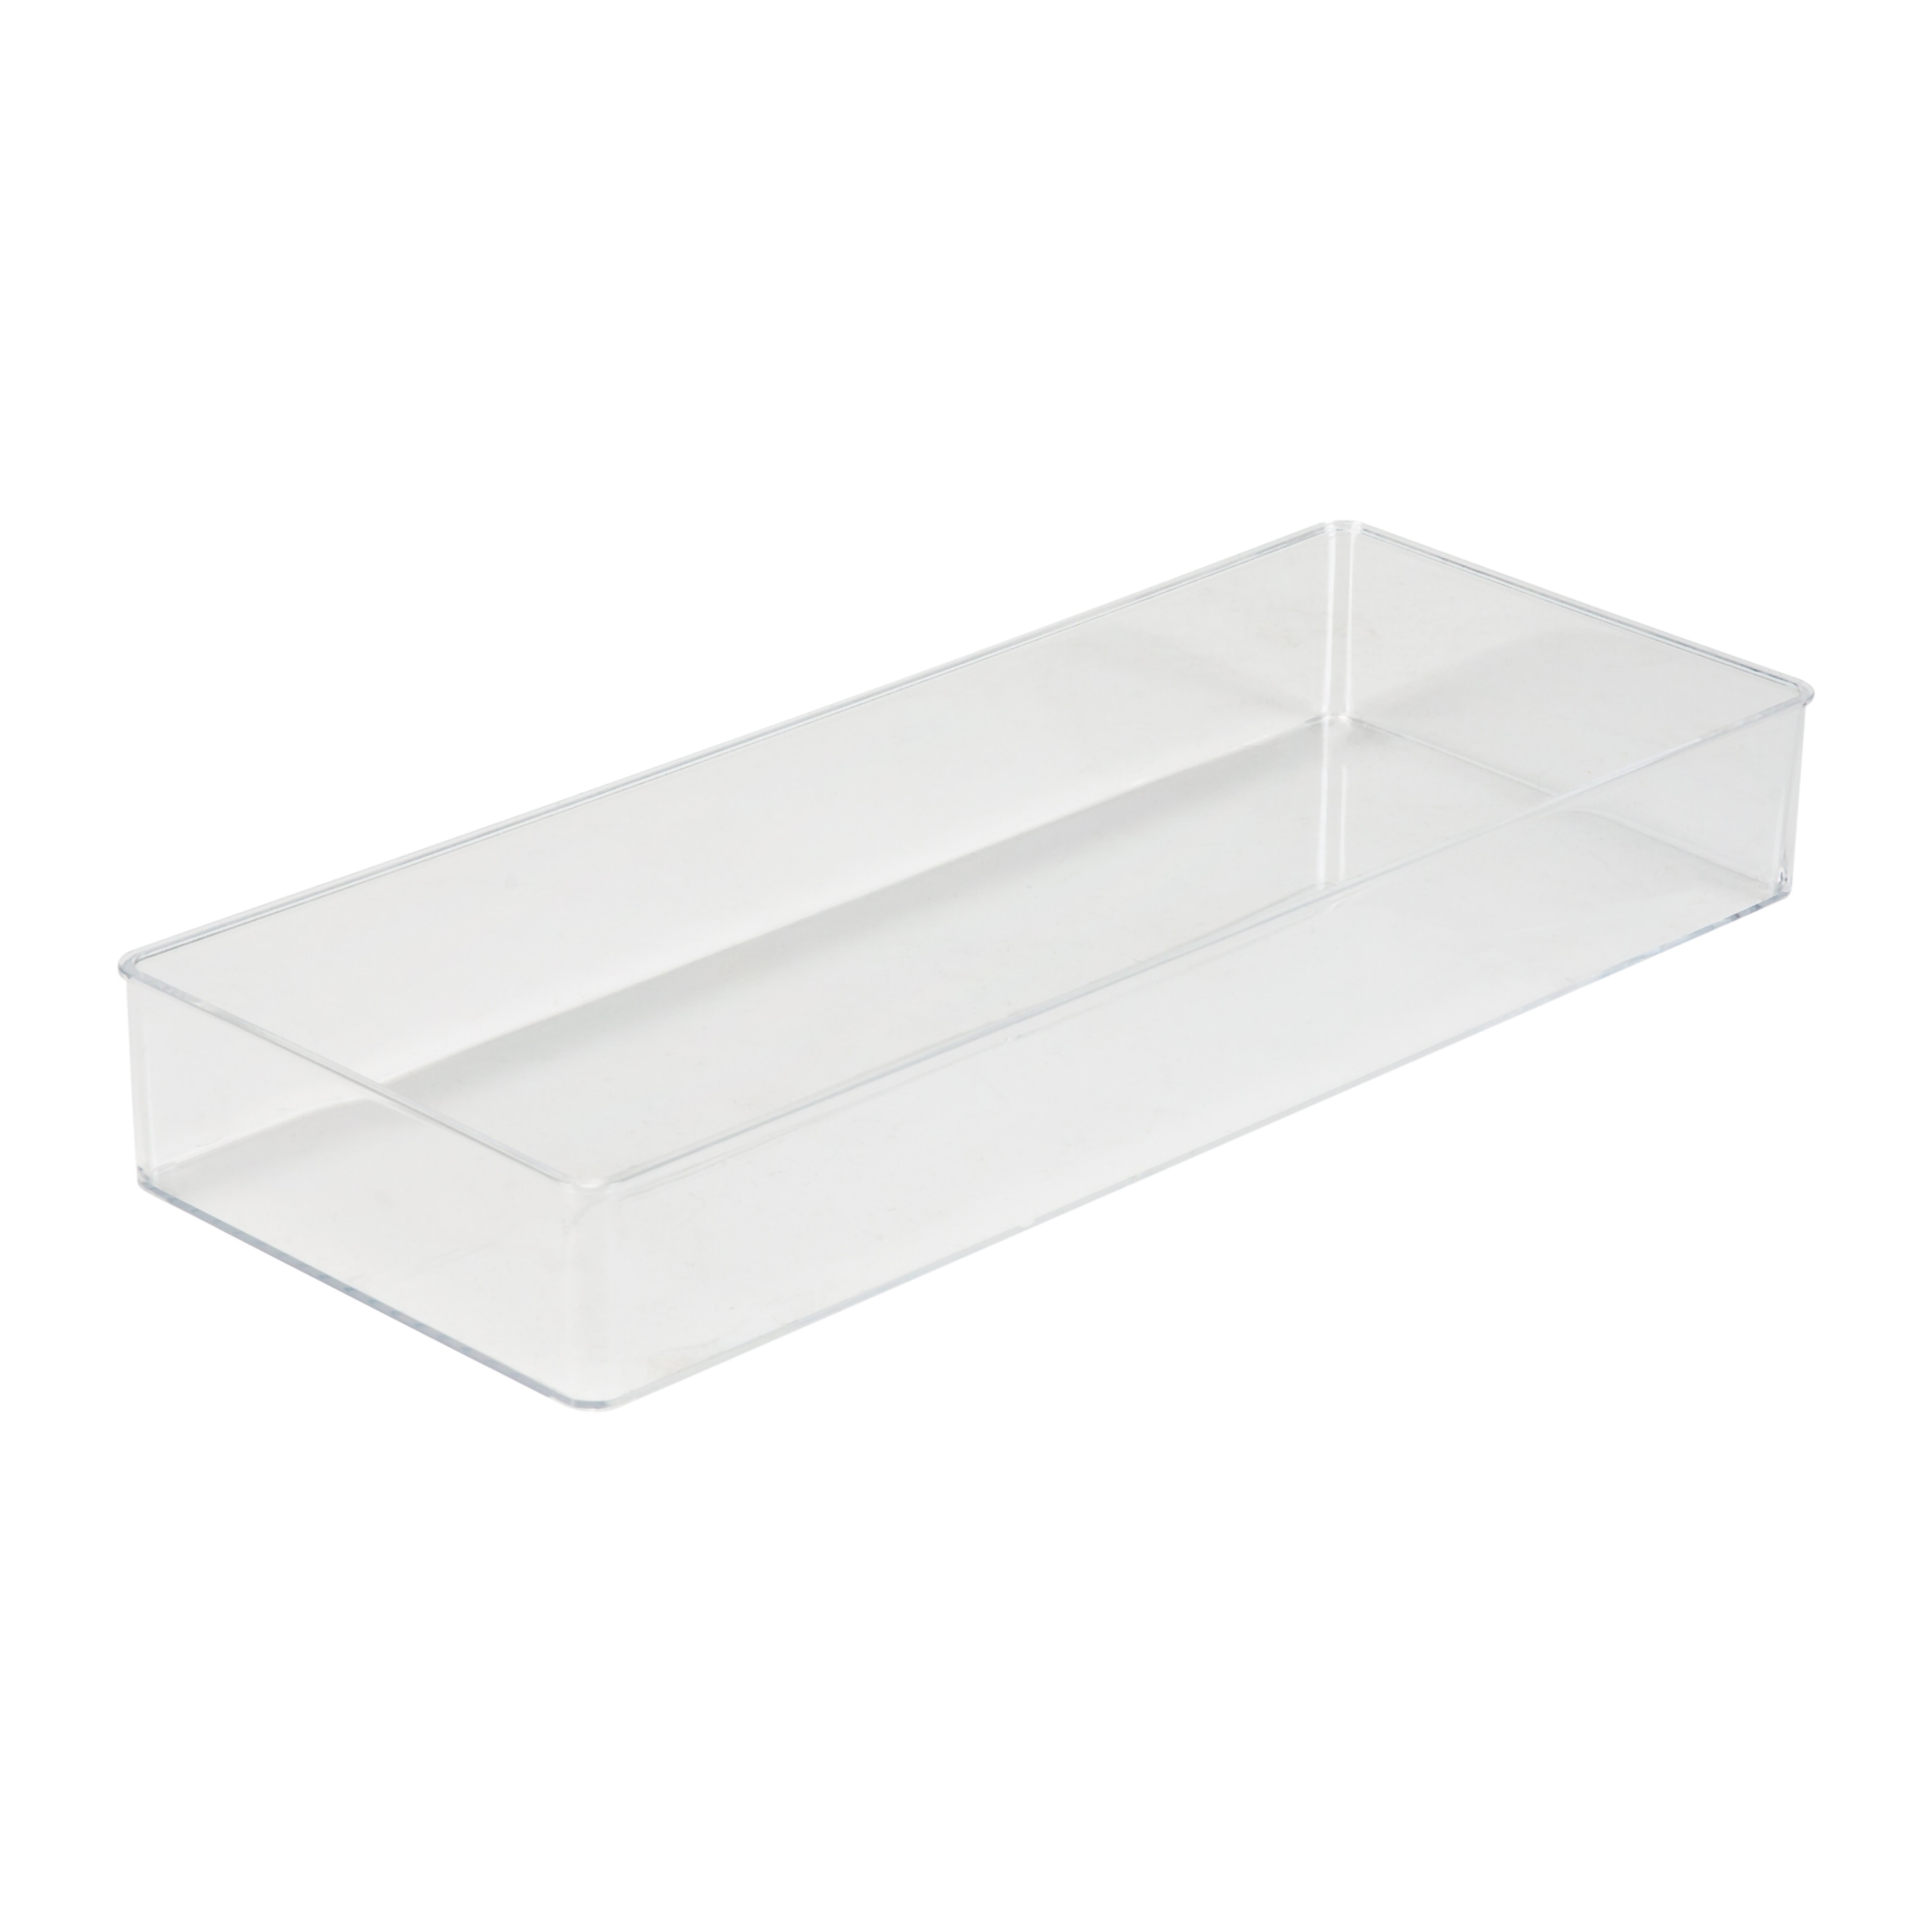 https://ak1.ostkcdn.com/images/products/is/images/direct/6f6ccc70aeb45e53f03ead122f4f29a0eaf5d075/Simplify-Long-Rectangular-Drawer-Organizer-in-Clear.jpg